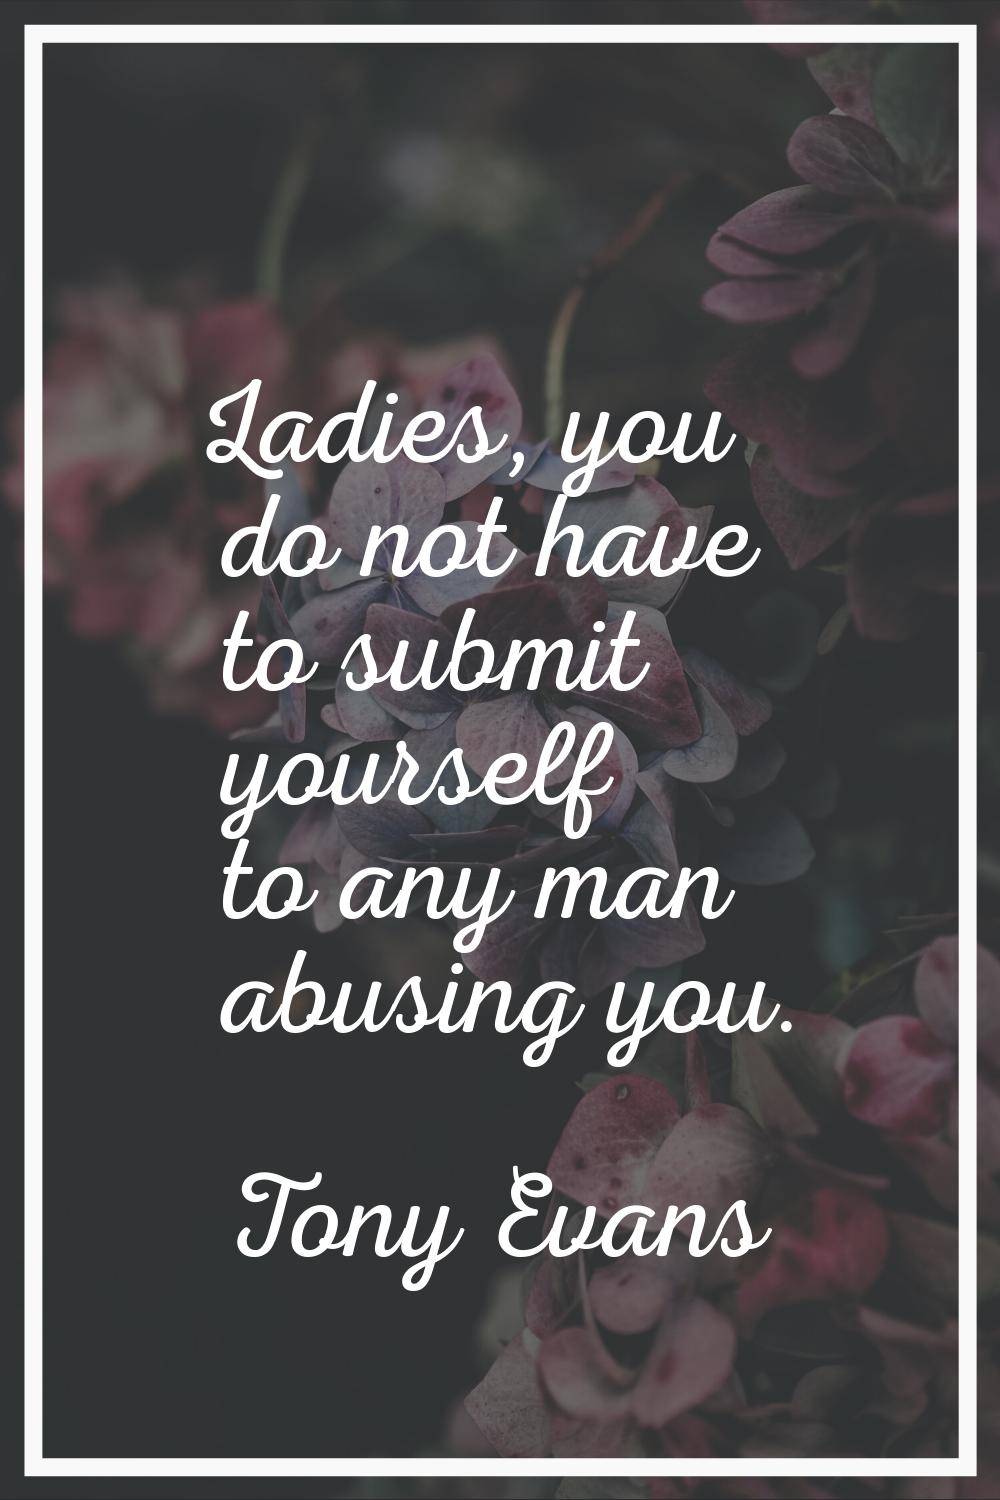 Ladies, you do not have to submit yourself to any man abusing you.